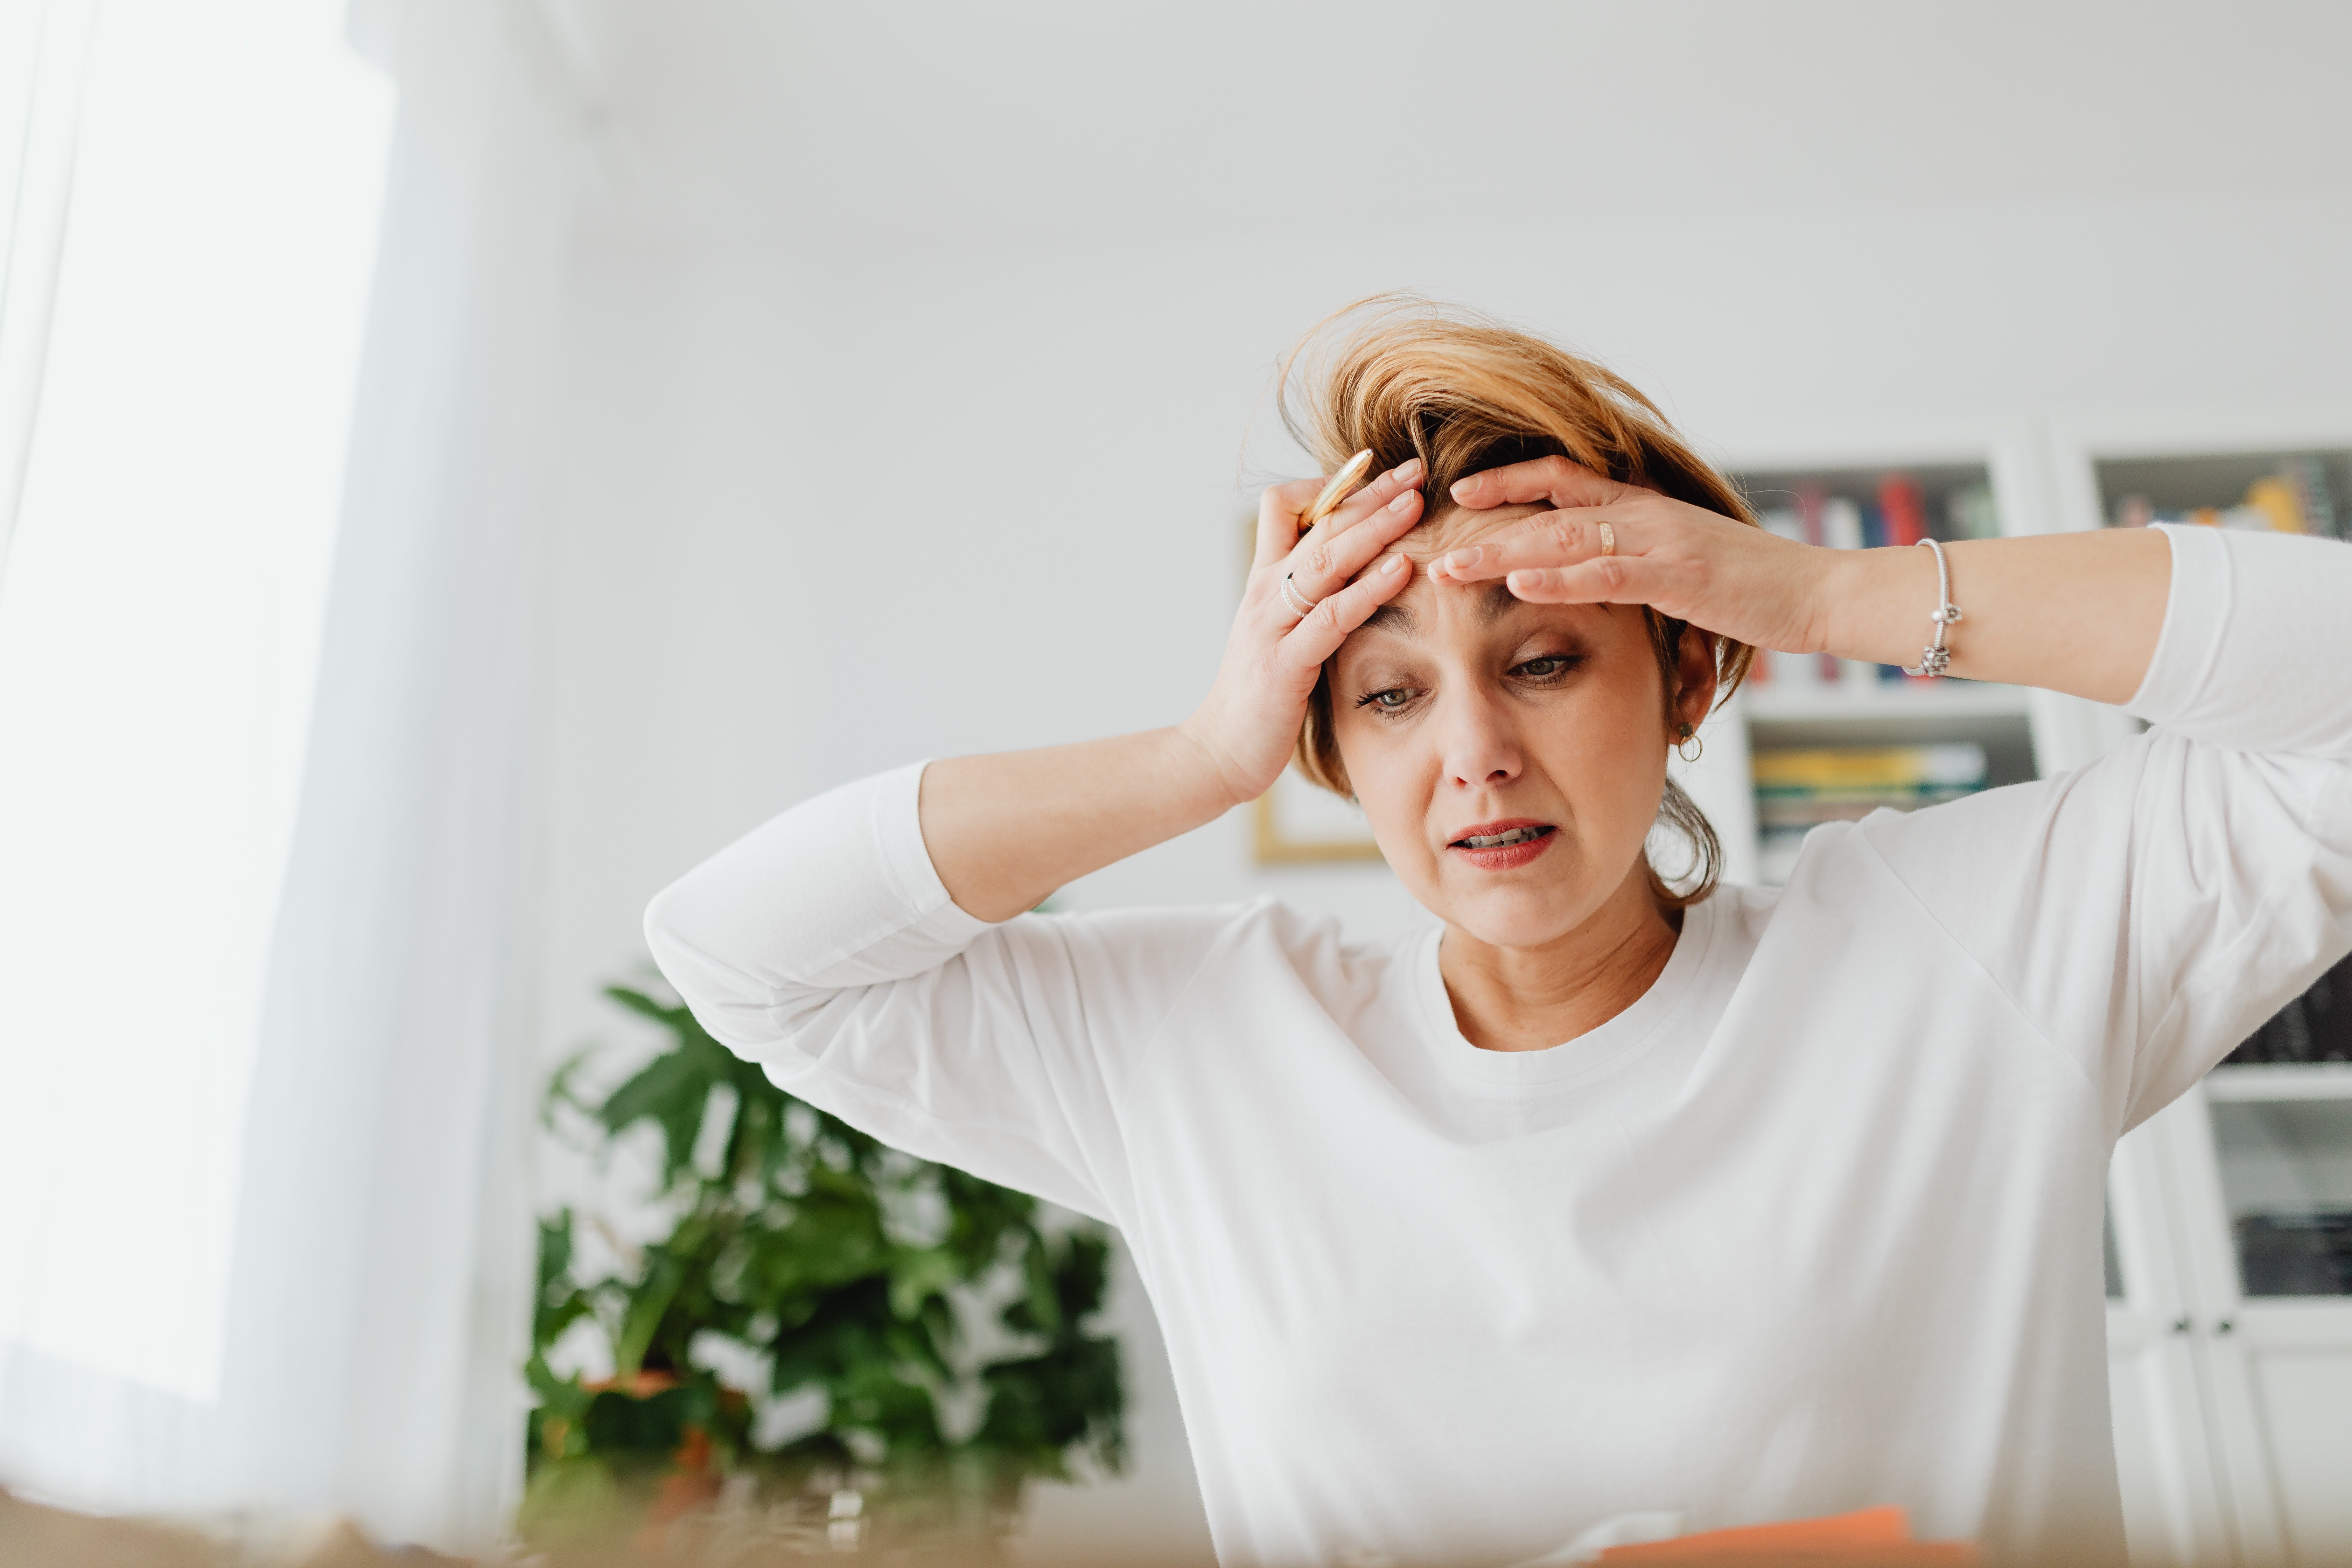 A distraught-looking woman. | Source: Pexels